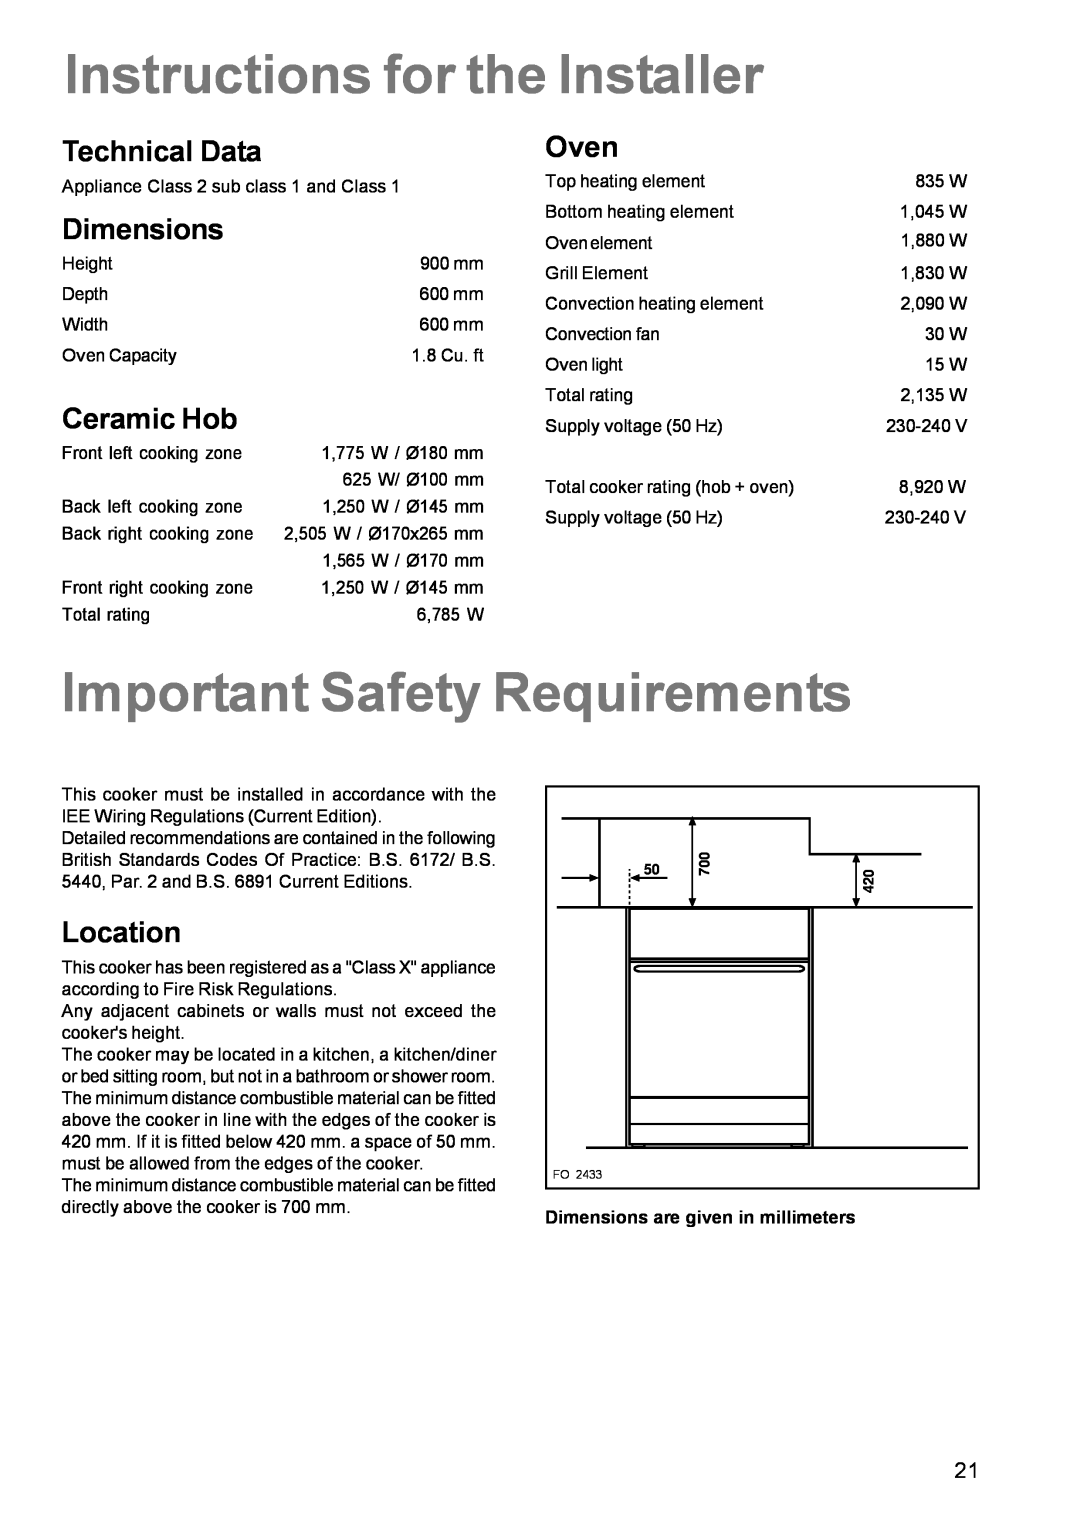 Zanussi ZCE 631 Instructions for the Installer, Important Safety Requirements, Technical Data, Dimensions, Ceramic Hob 